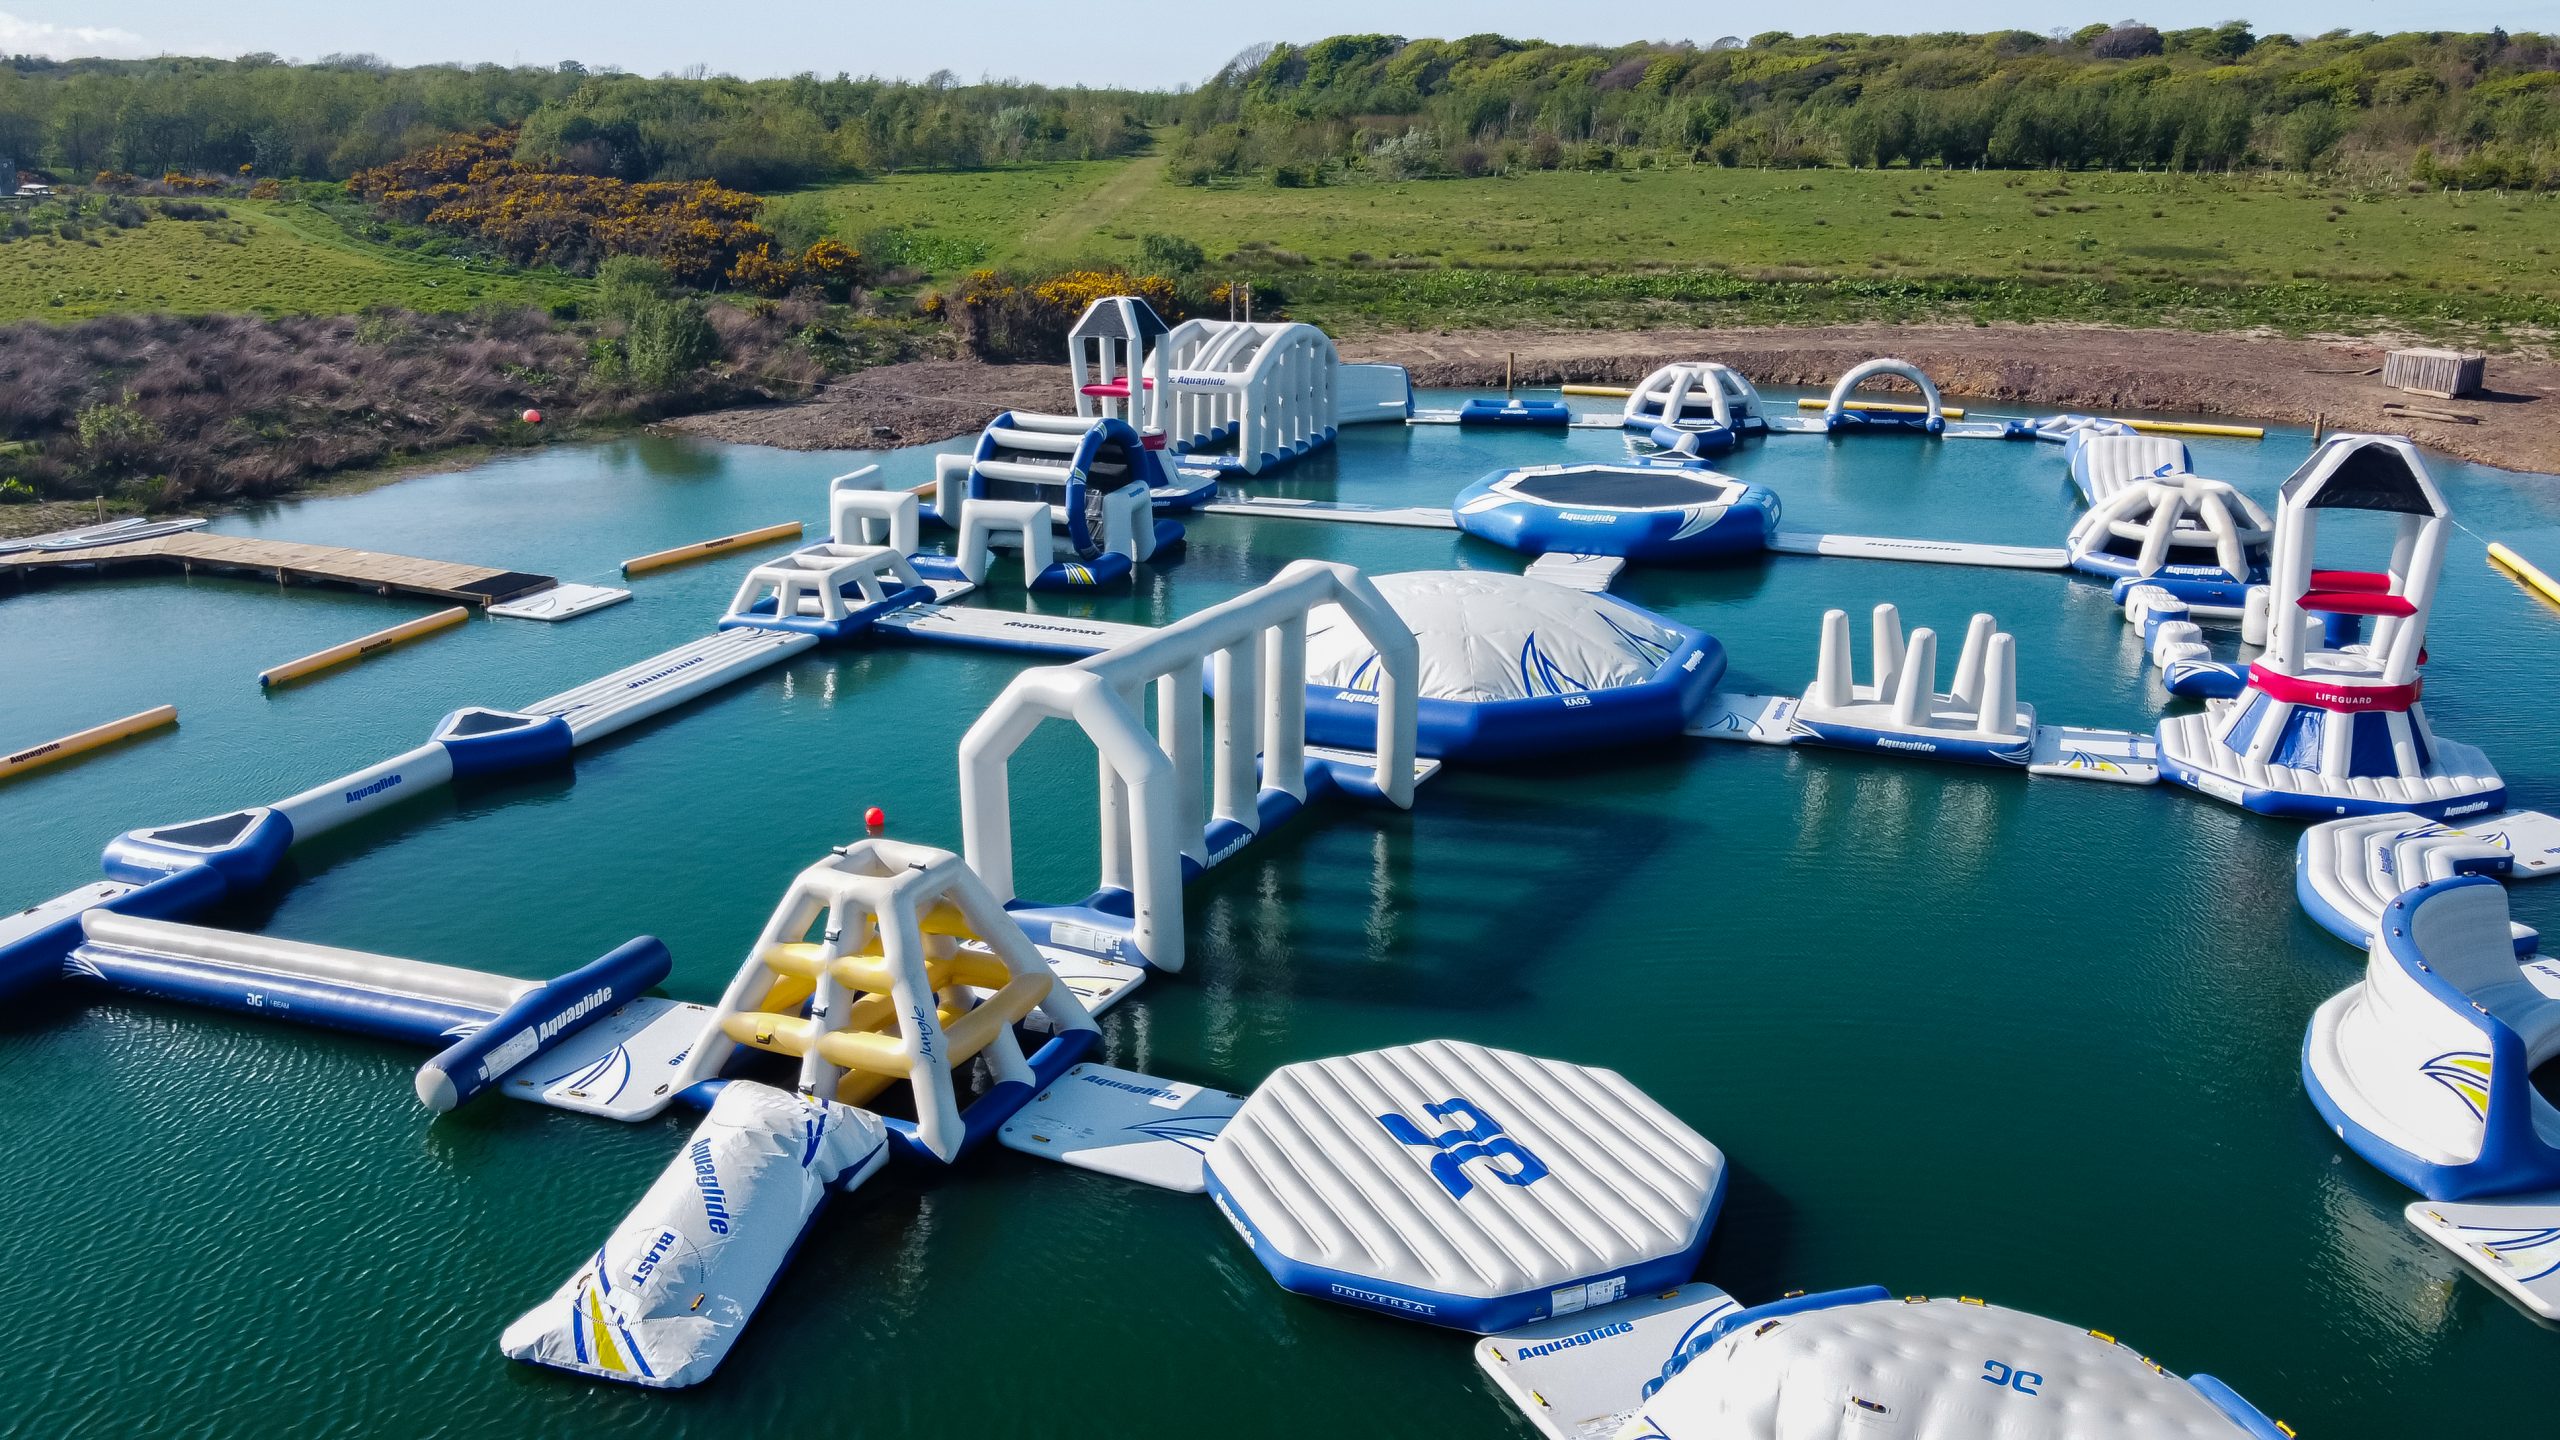 Waterpark with different obstacles located in Devon, UK